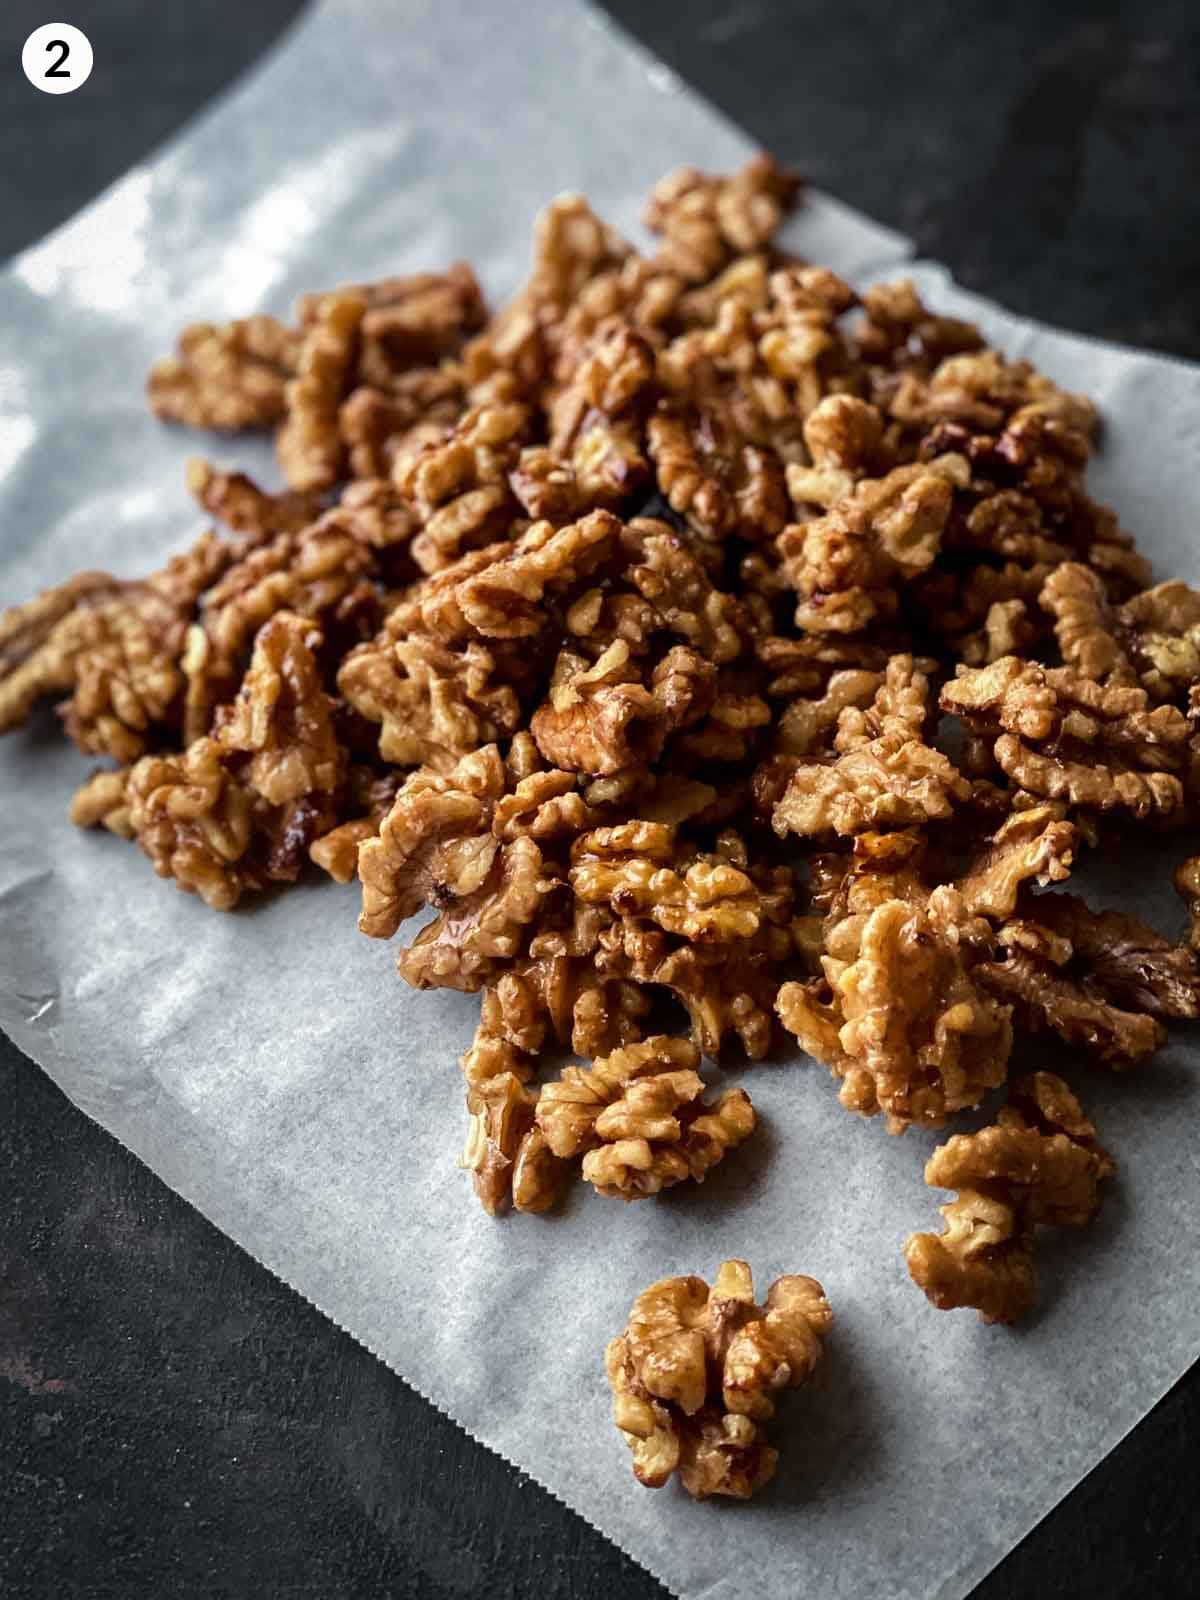 candied walnuts on a baking paper